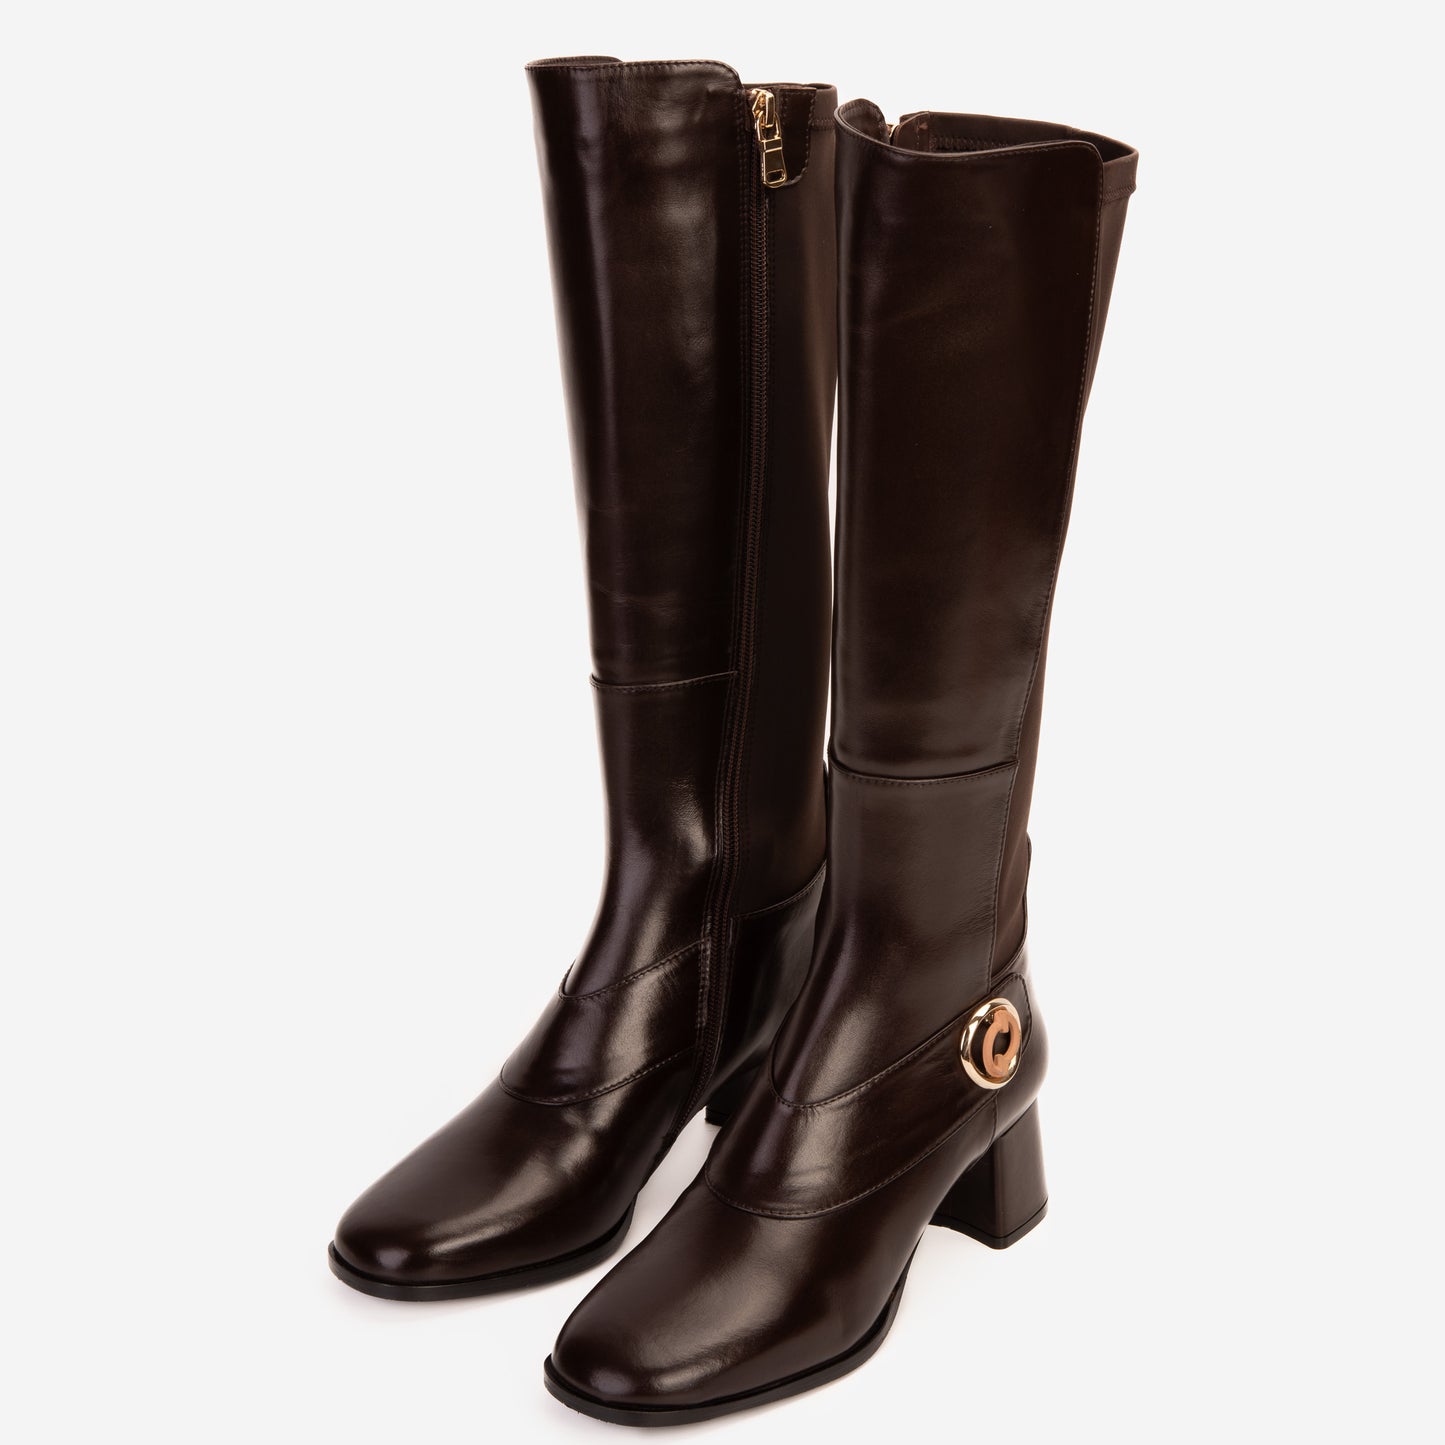 The Windsor Brown Leather Knee High Boot